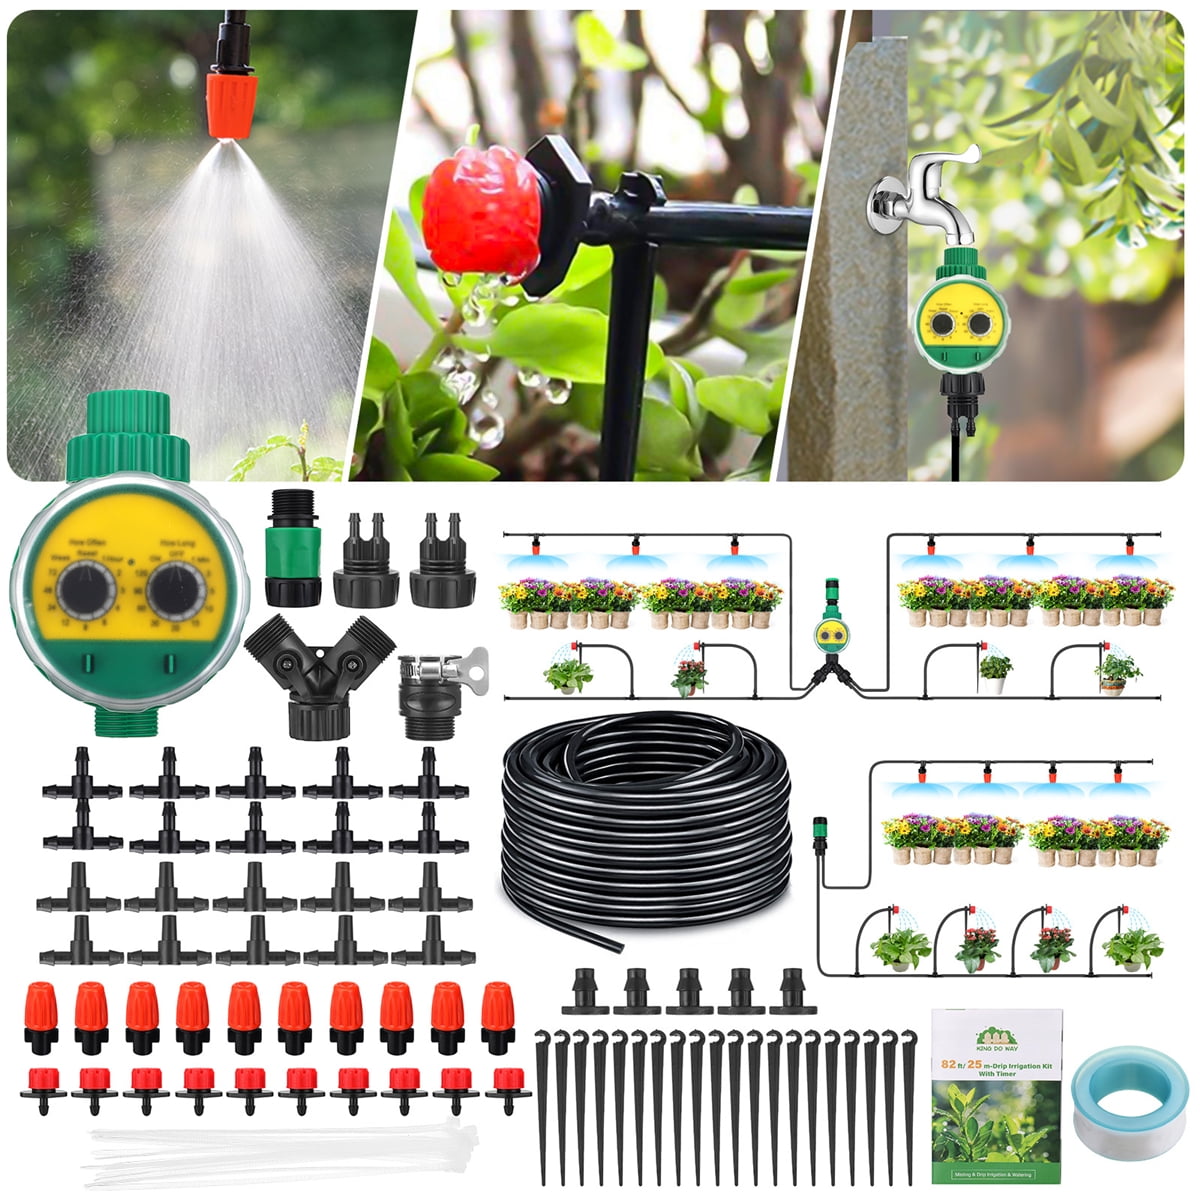 Details about   Drip Garden Micro Watering System Irrigation Kit Greenhouses Self Automatic 50M 